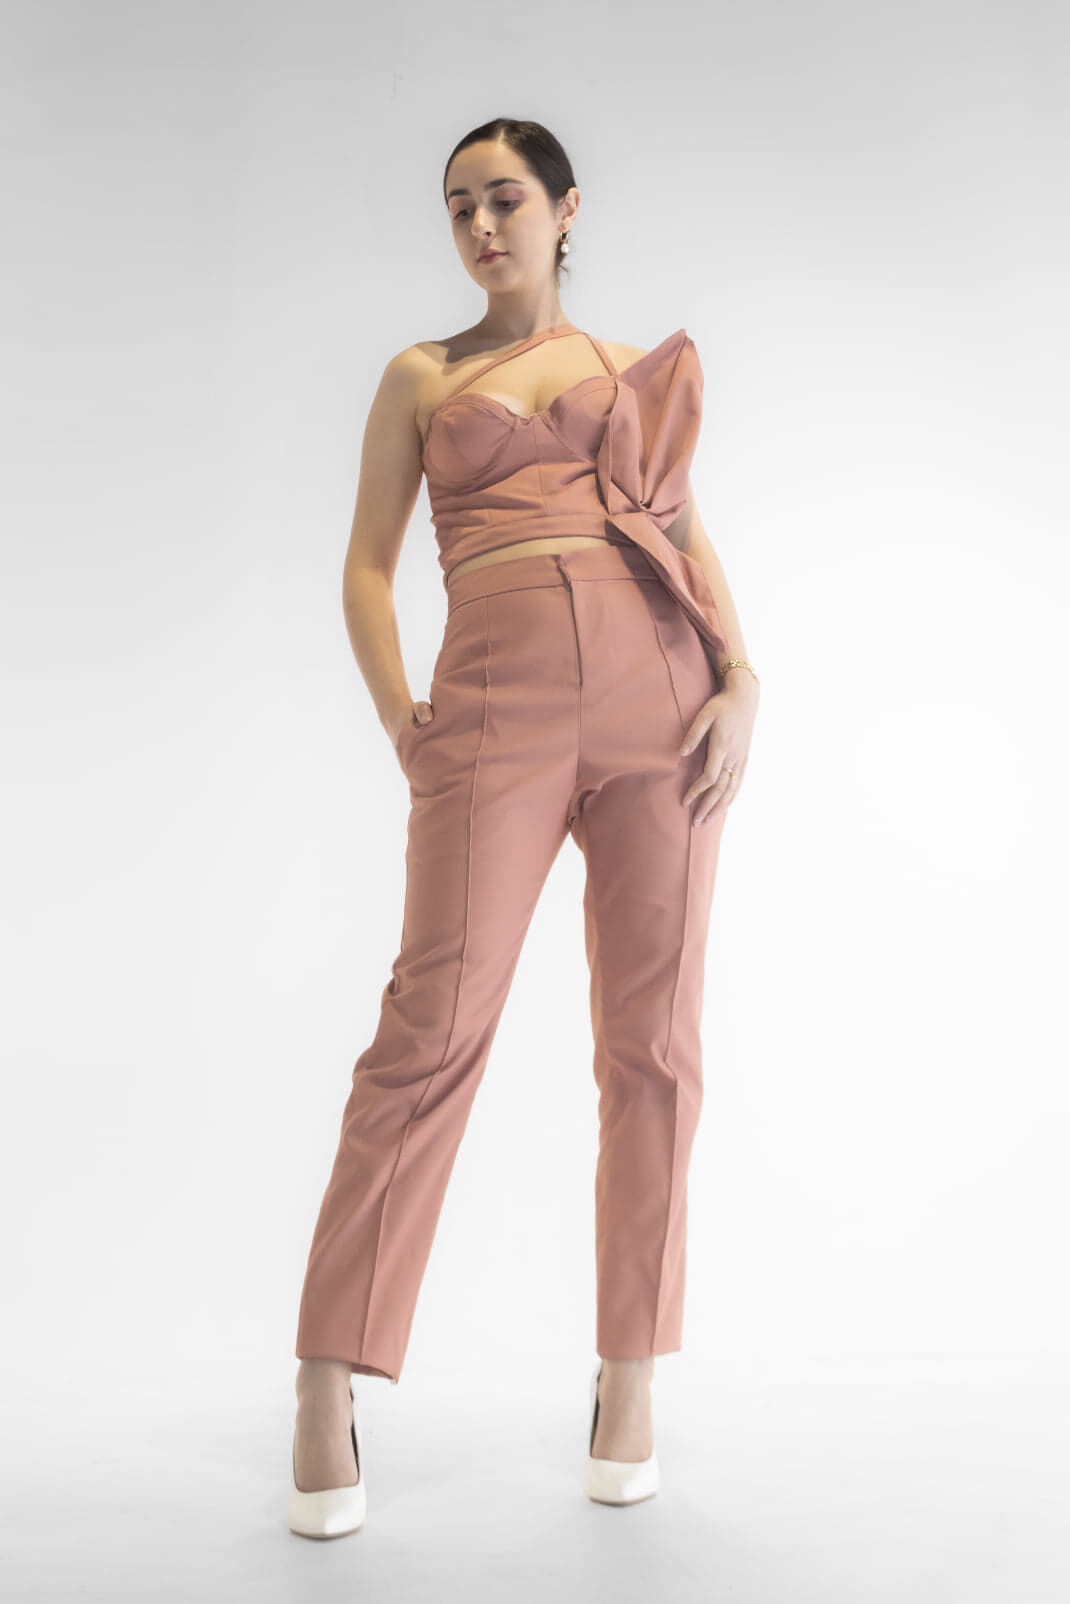 A woman models a sophisticated peach-colored jumpsuit with a structured bodice and asymmetrical peplum detail, paired with white heels.